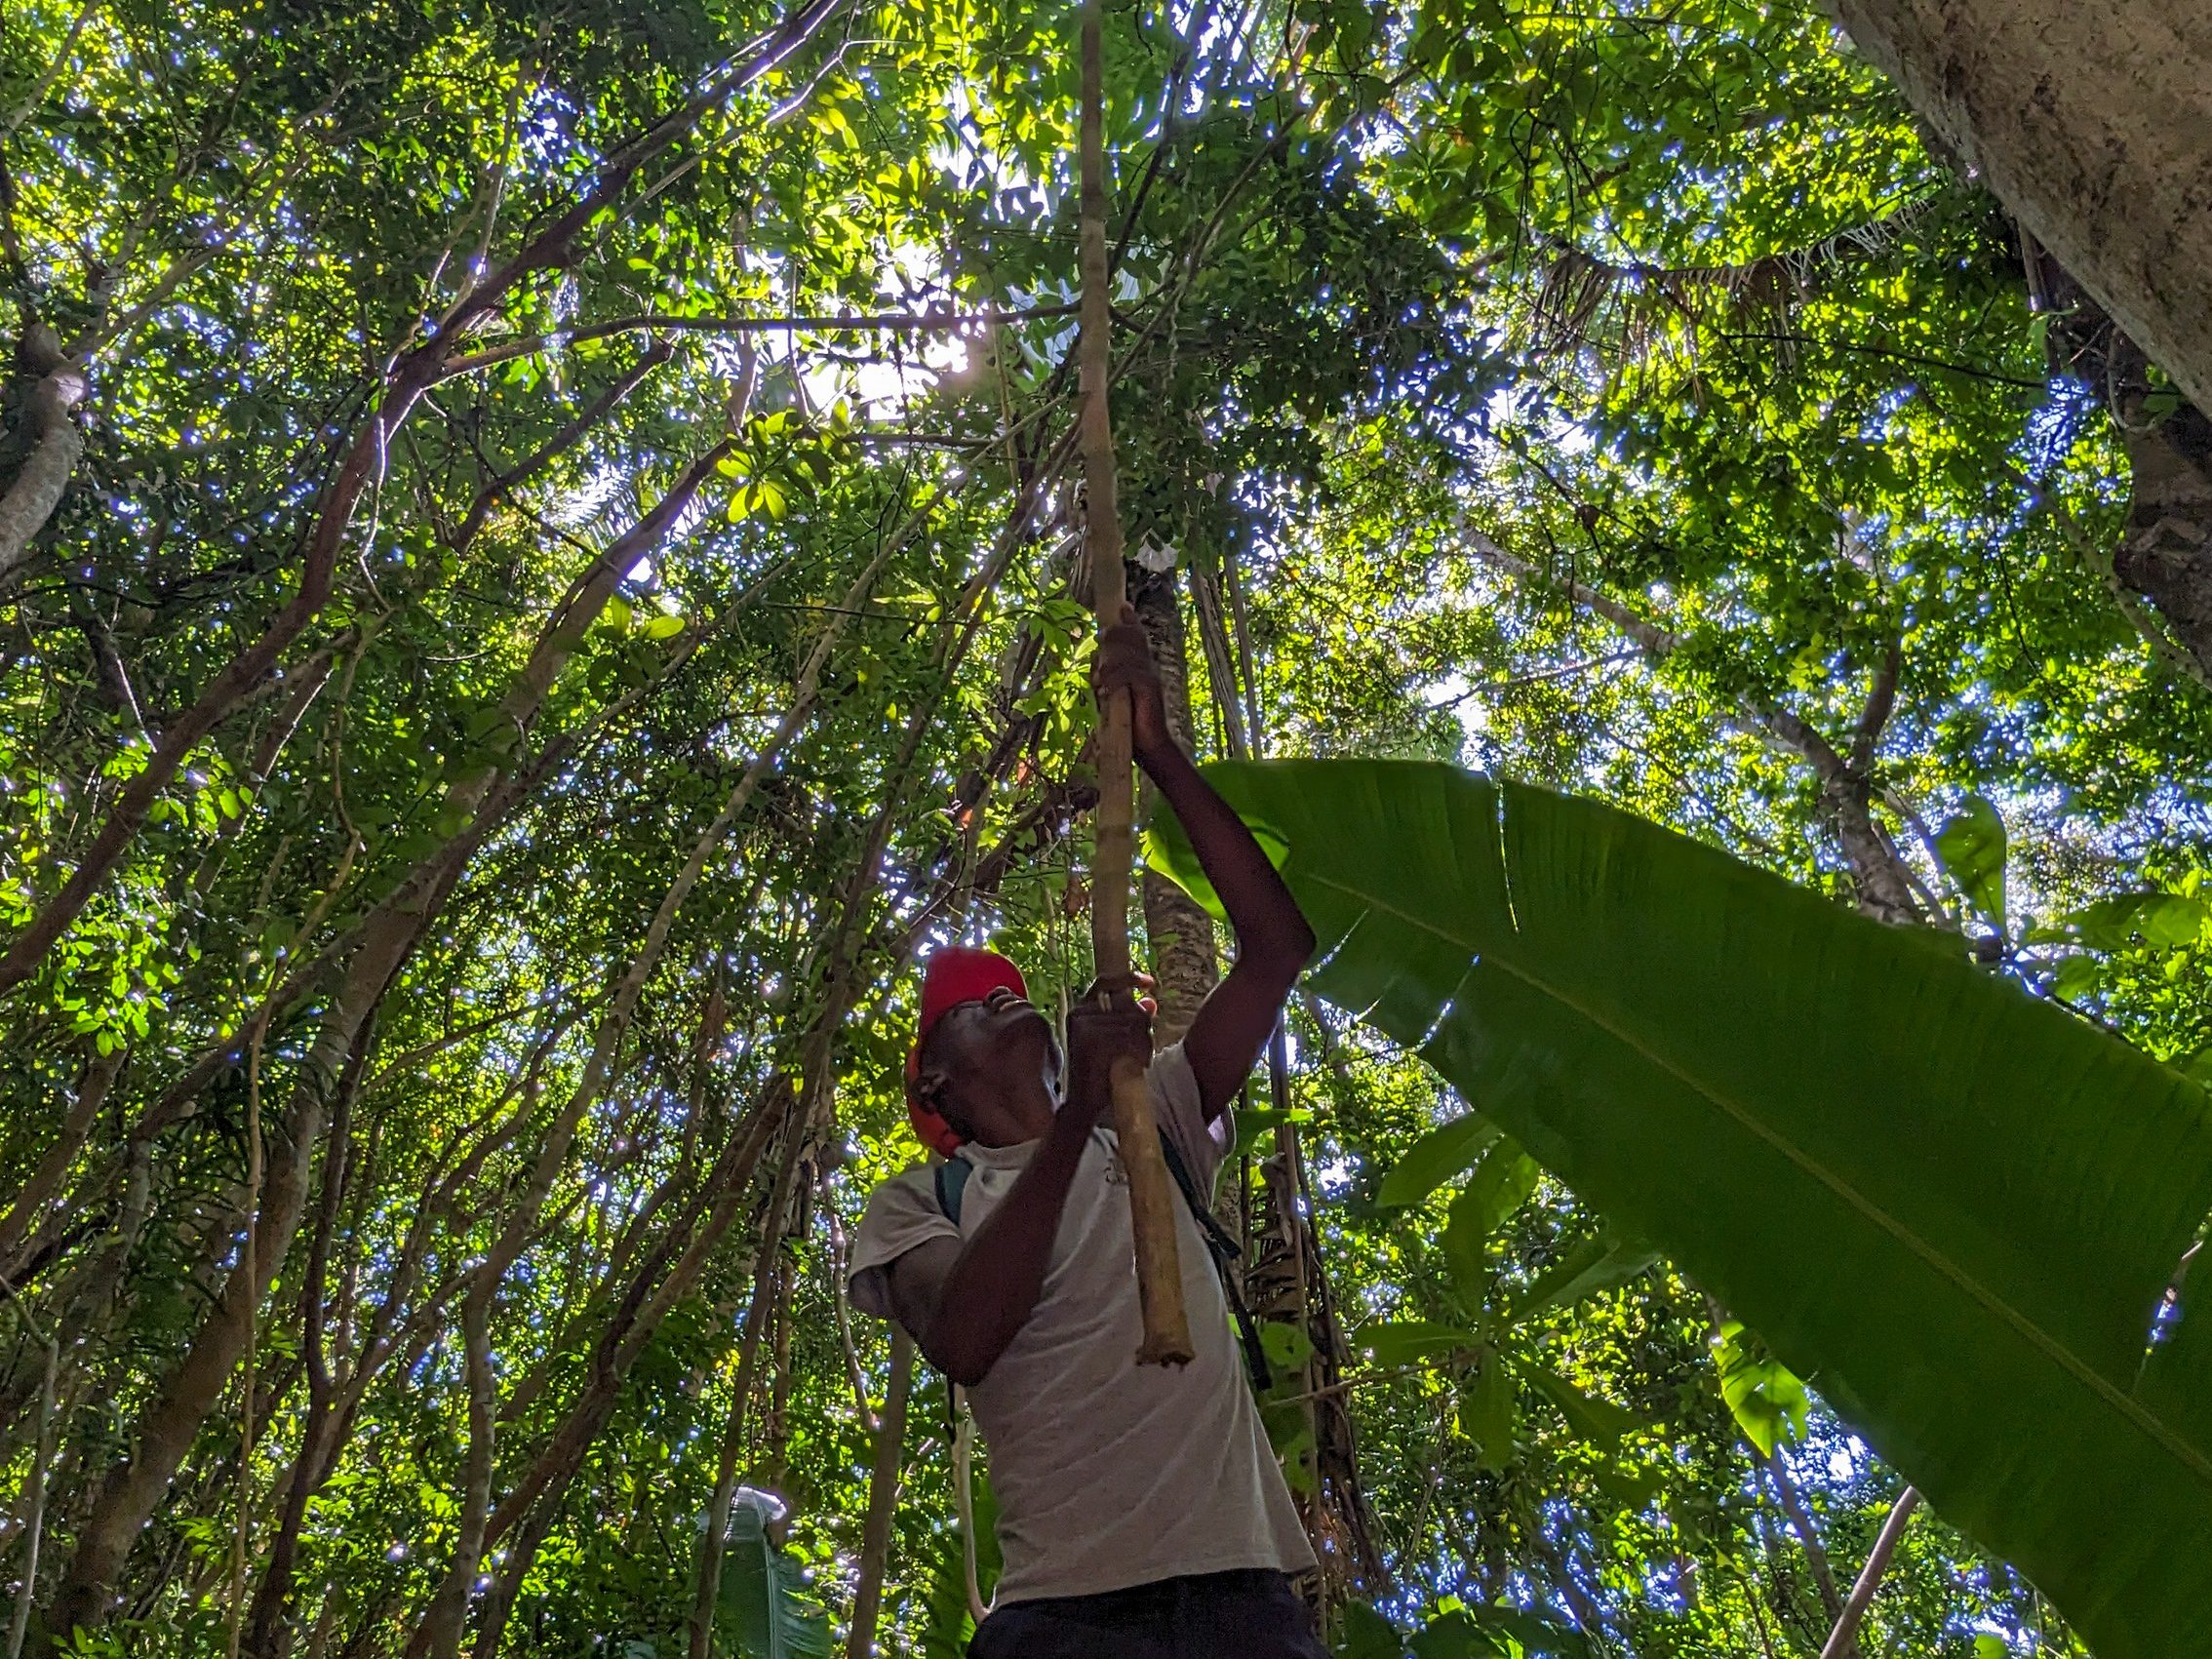 A local guide using a stick to gently get a leaf gecko closer to tourists. In the picture the full power of Lokobe's nature can be seen, with lush rainforest and beautiful green plants surrounding the sky.